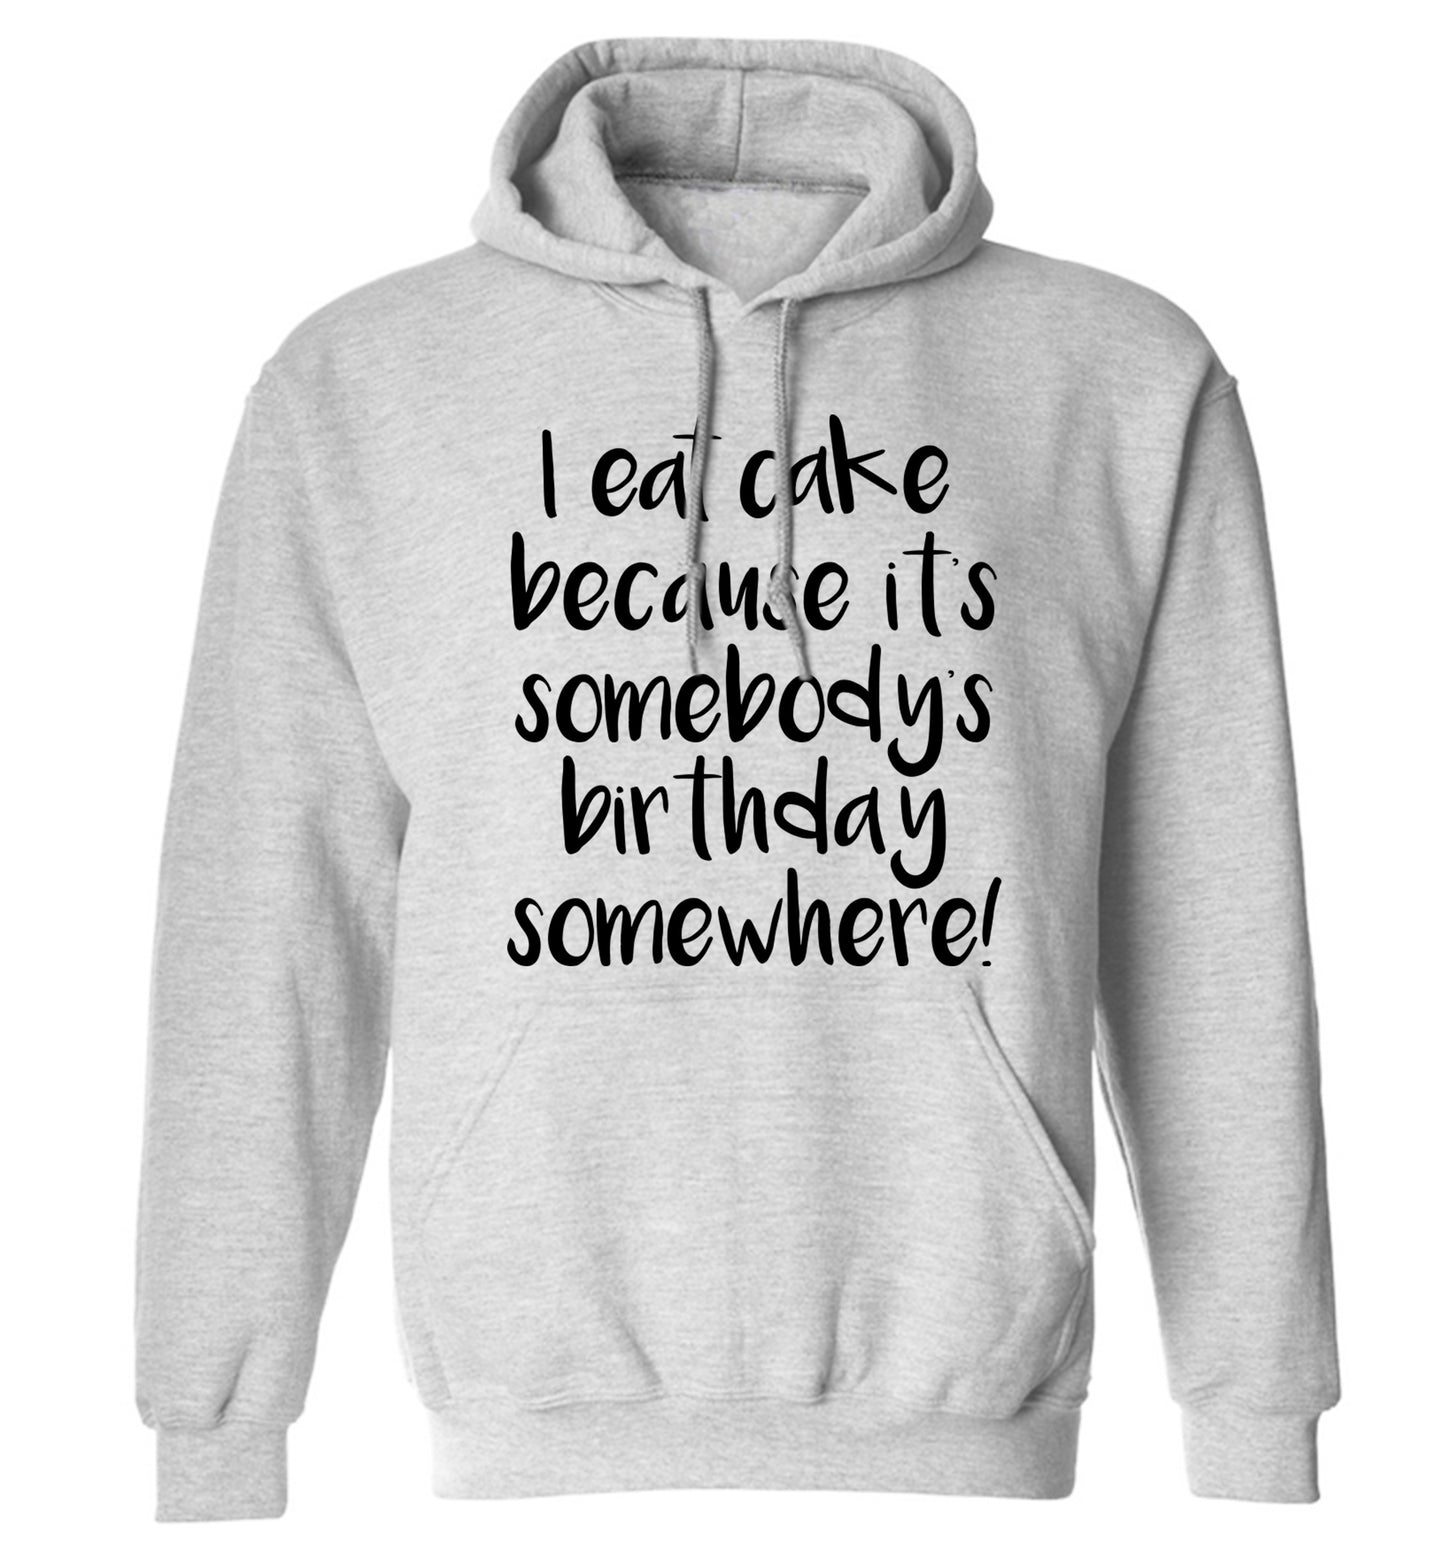 I eat cake because it's somebody's birthday somewhere! adults unisex grey hoodie 2XL